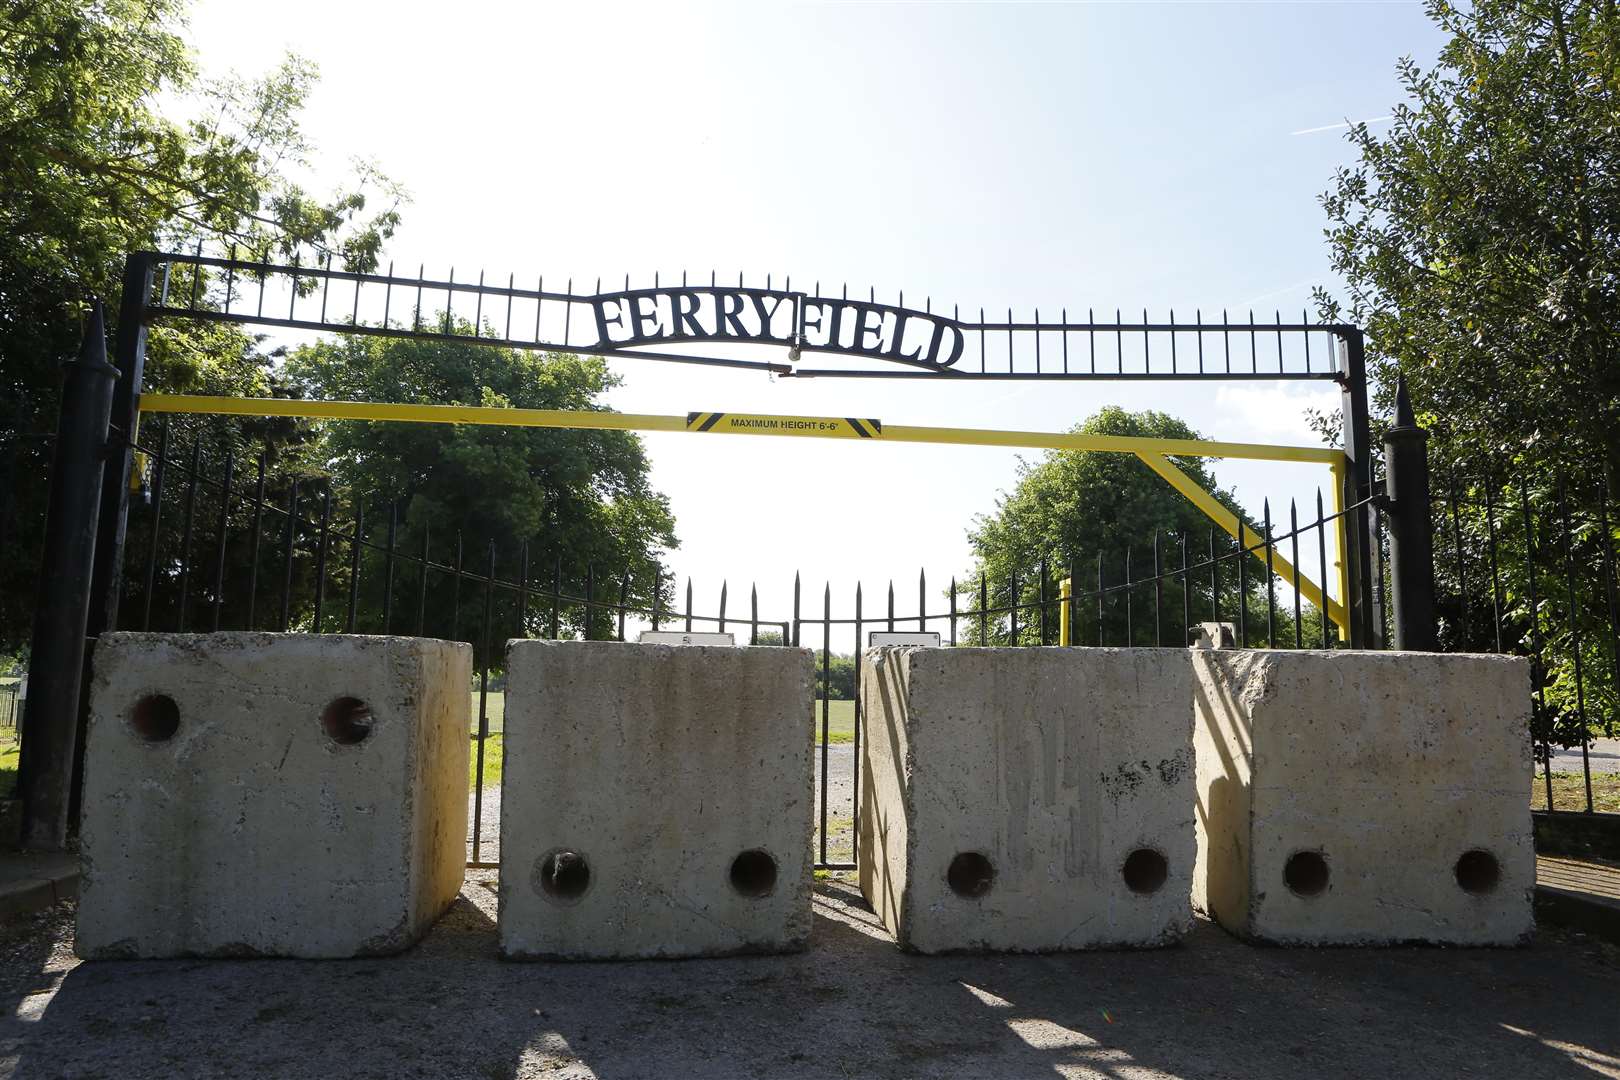 The huge concrete blocks were placed at the entrance to the rec